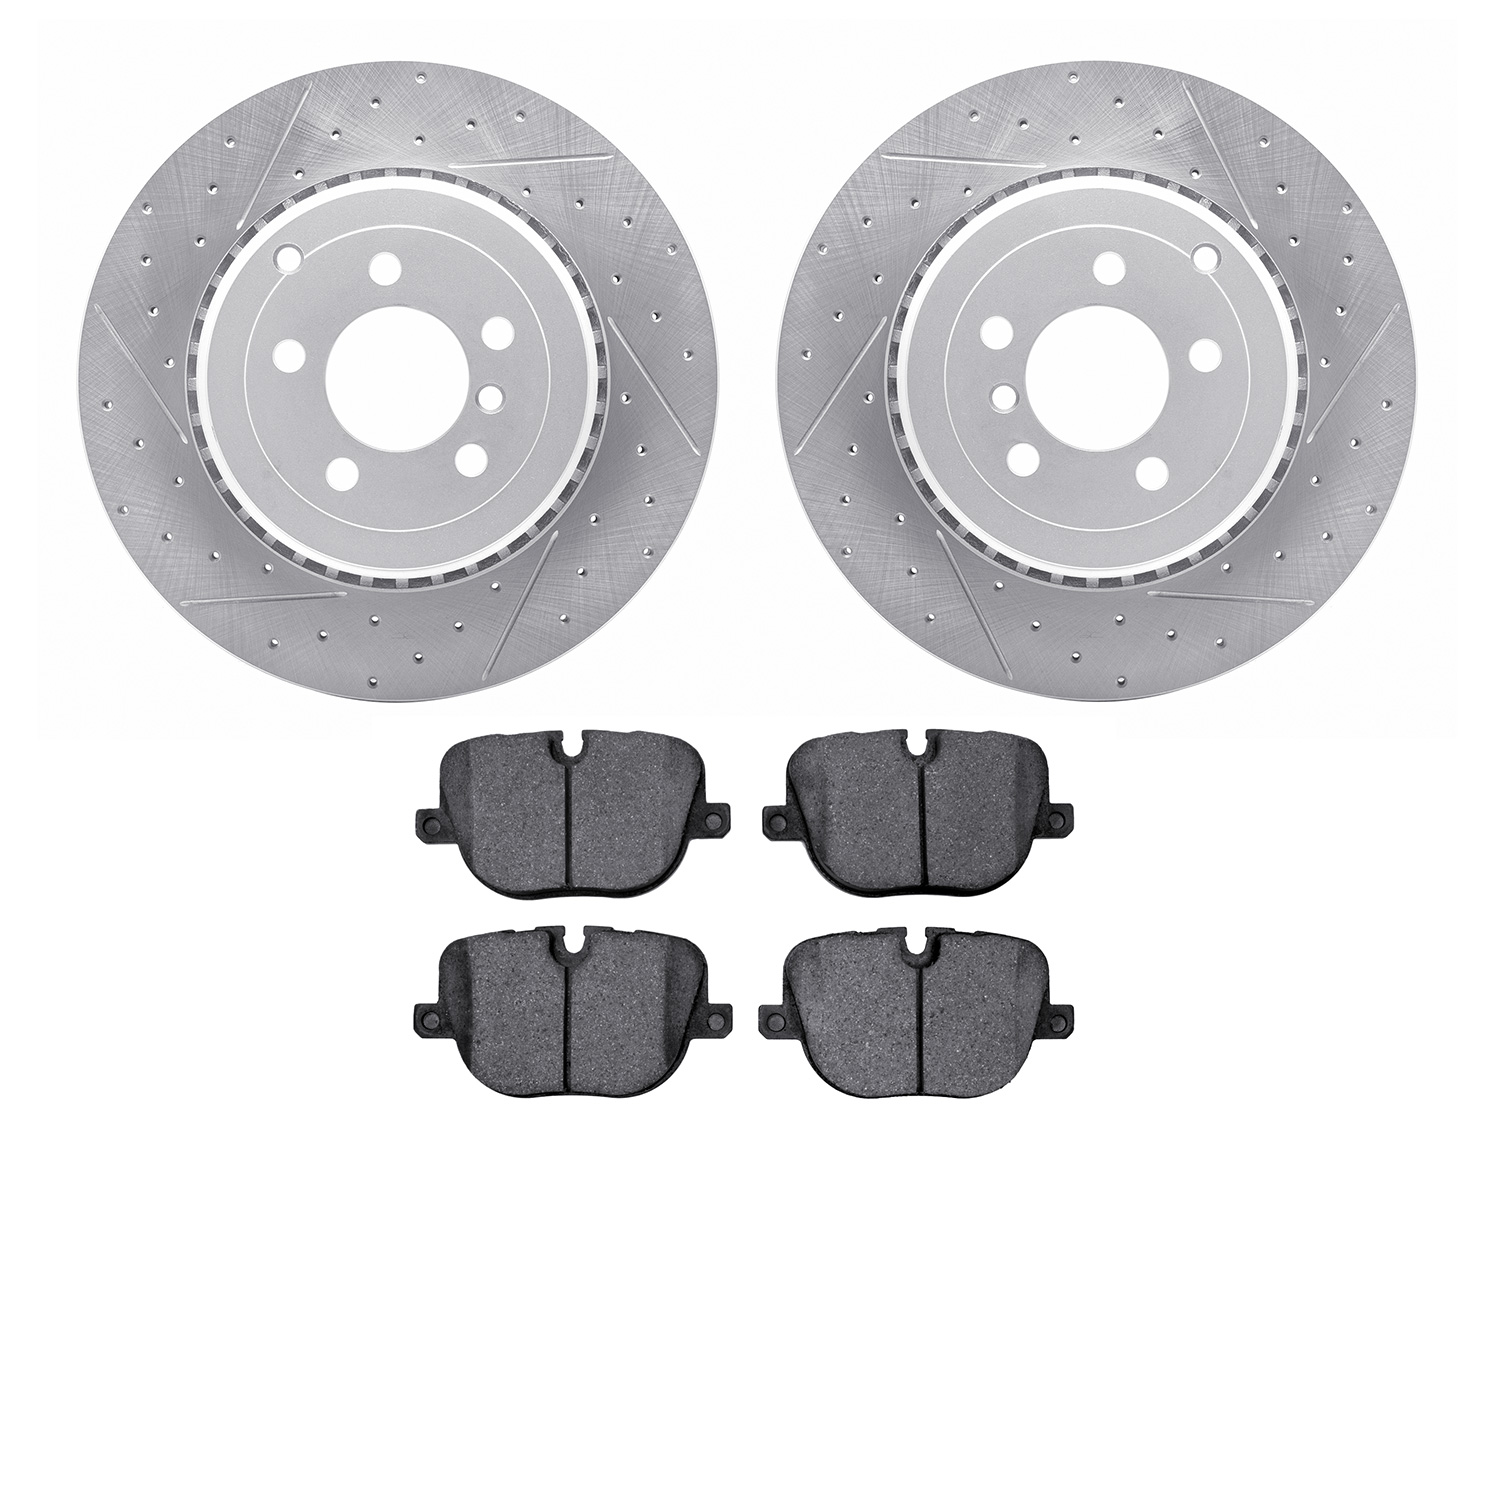 2502-11023 Geoperformance Drilled/Slotted Rotors w/5000 Advanced Brake Pads Kit, 2010-2012 Land Rover, Position: Rear